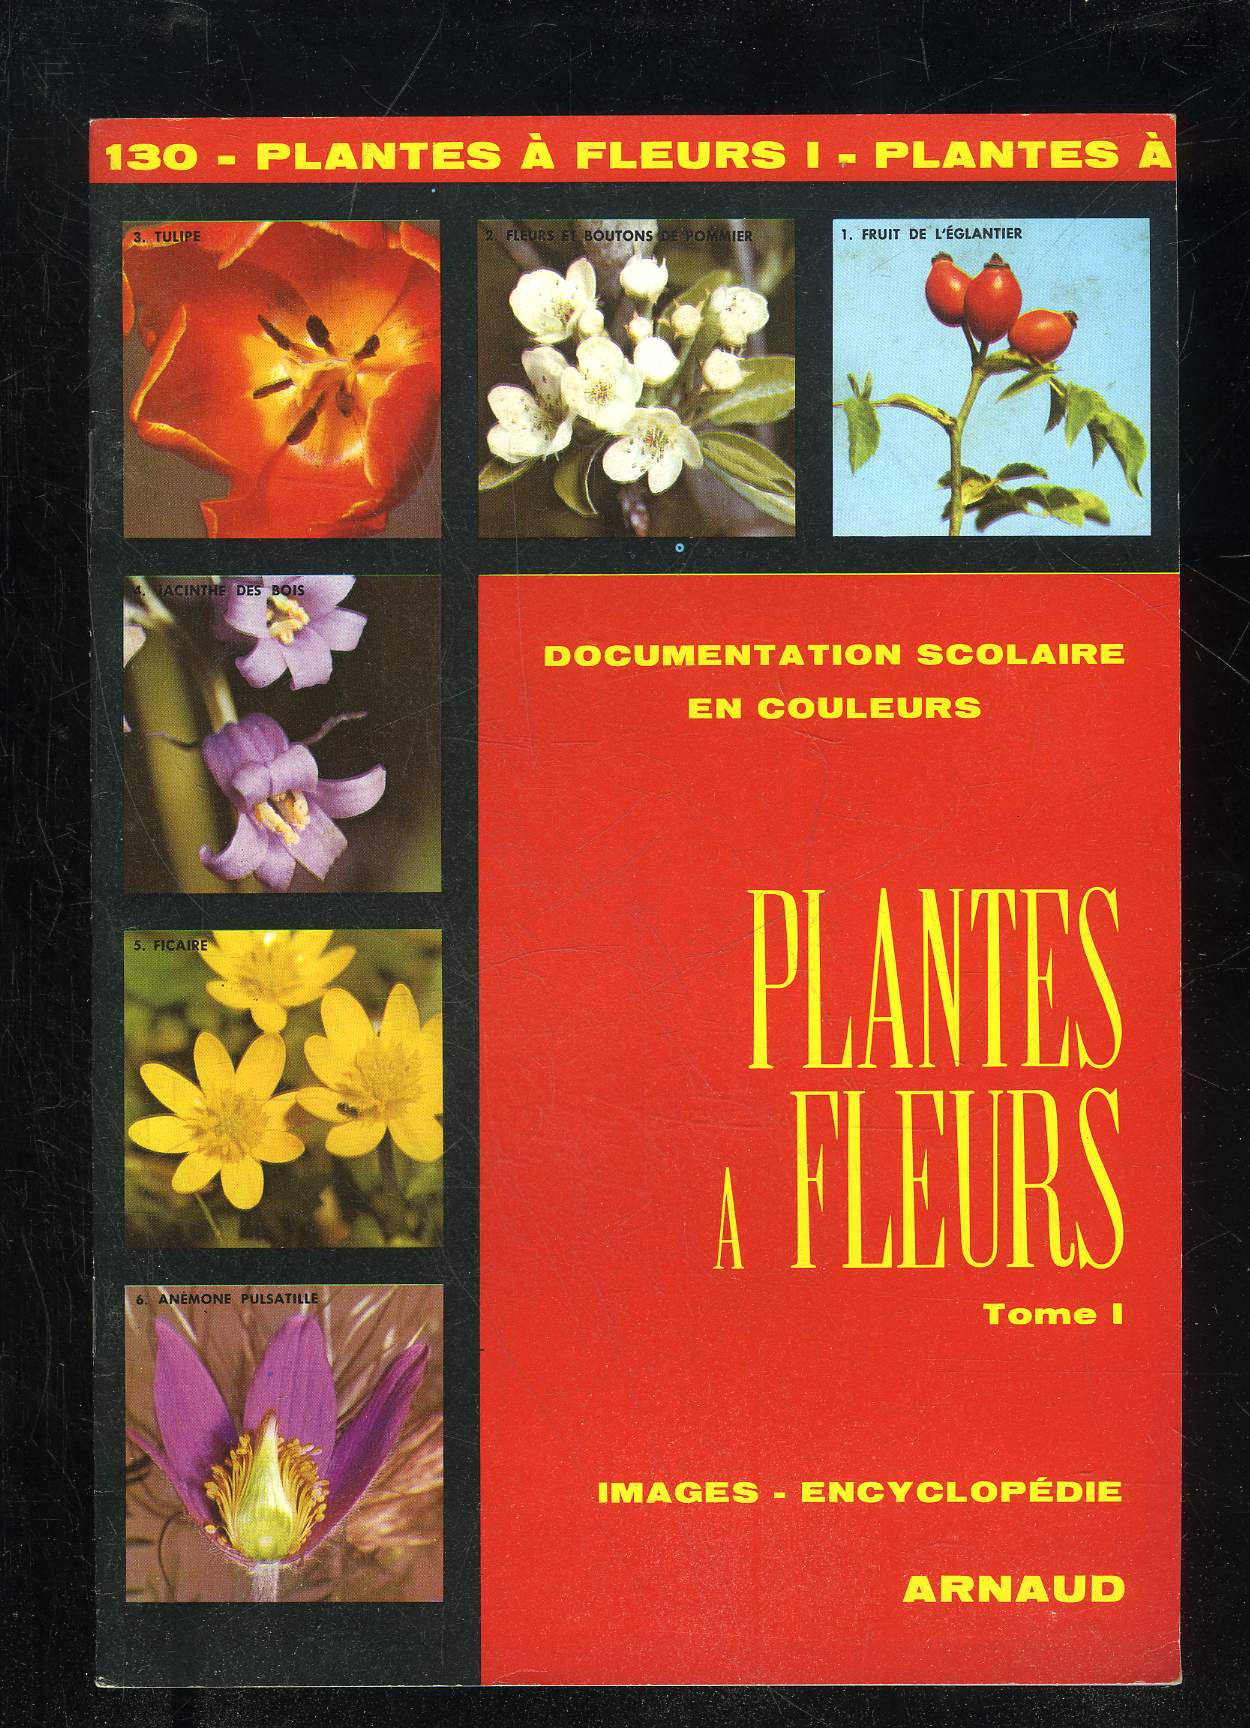 COLLECTION IMAGES ENCYCLOPEDIE - 130 - PLANTES A FLEURS TOME I